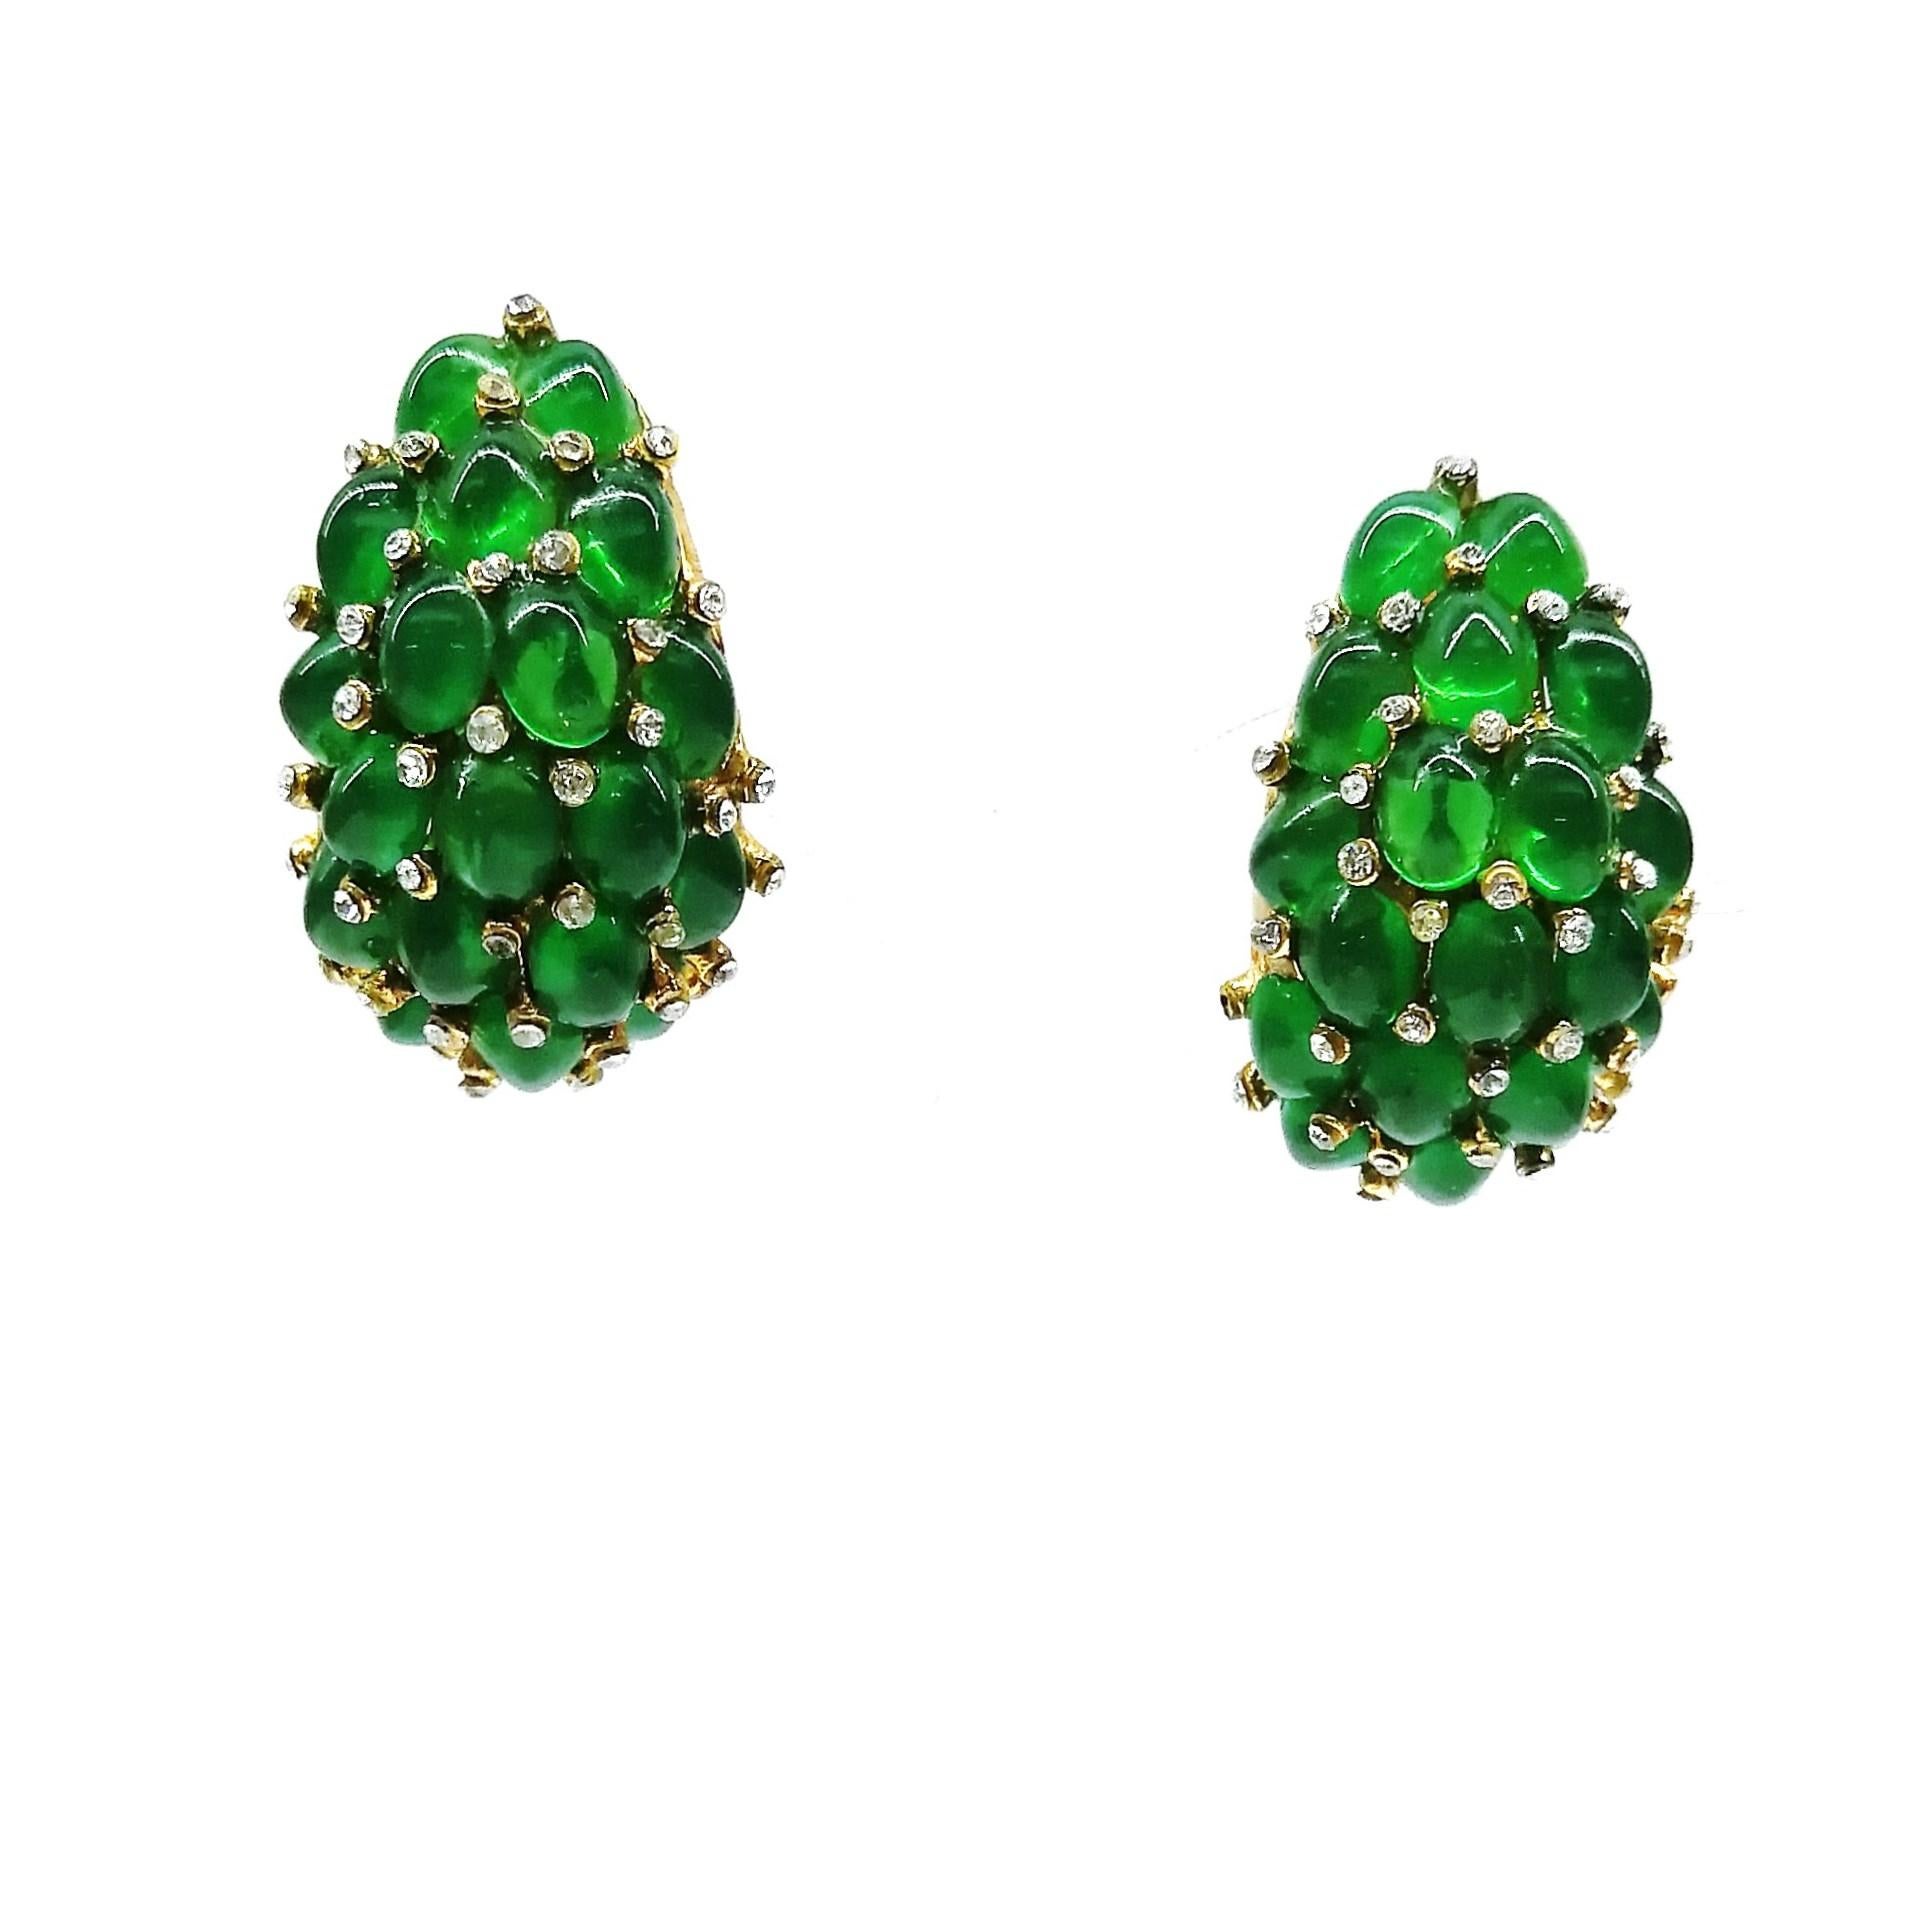 A chic and elegant pair of tailored earrings from Marcel Boucher, in emerald glass cabuchons, with single pastes studded in between each cabuchon, softly domed. Both earrings are fully marked. Classic and highly wearable earrings, with a comfortable